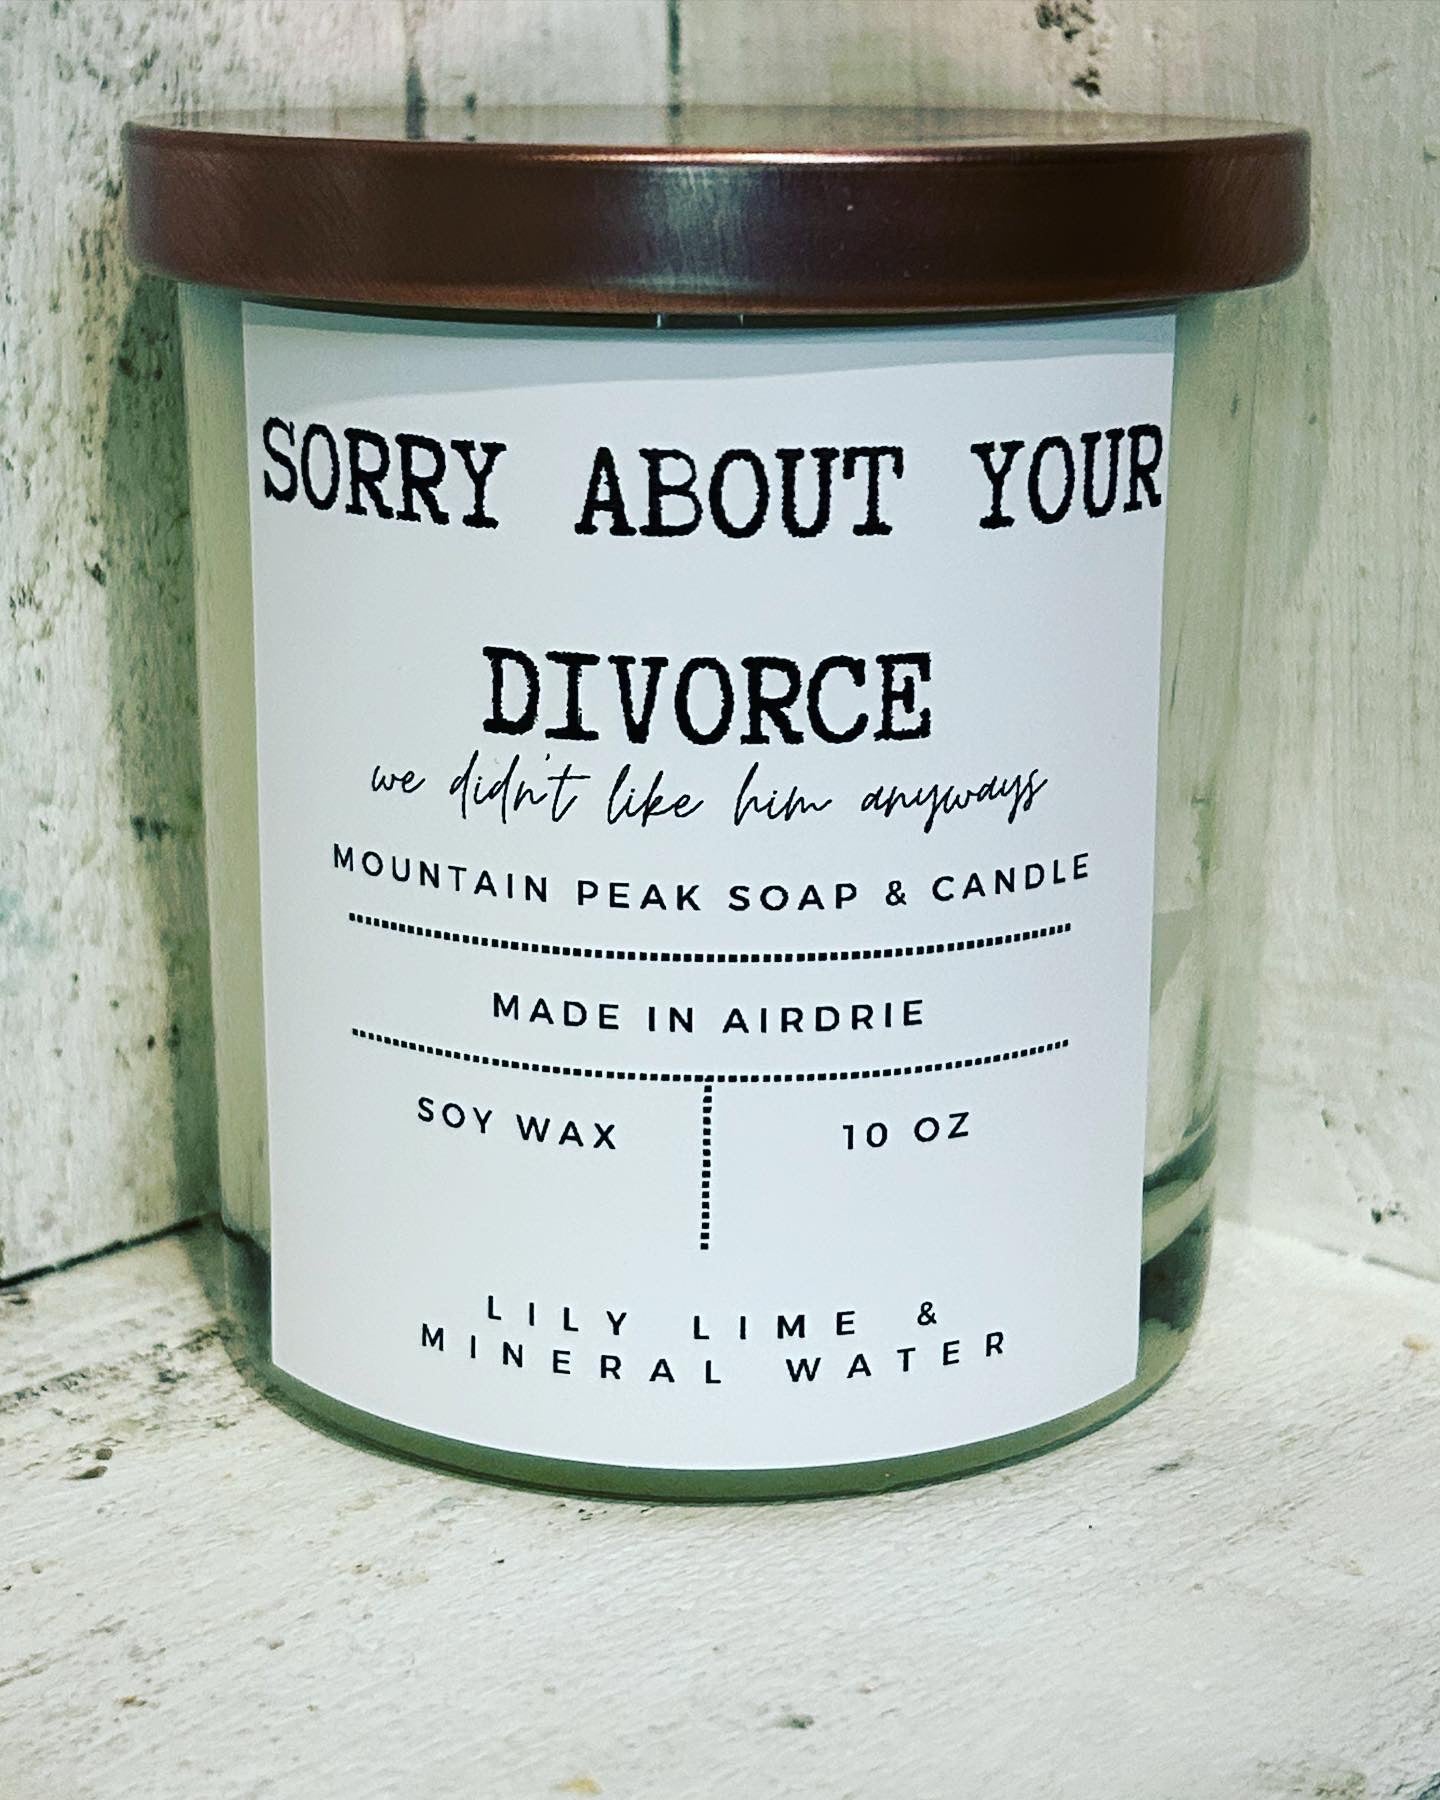 Sorry about your divorce